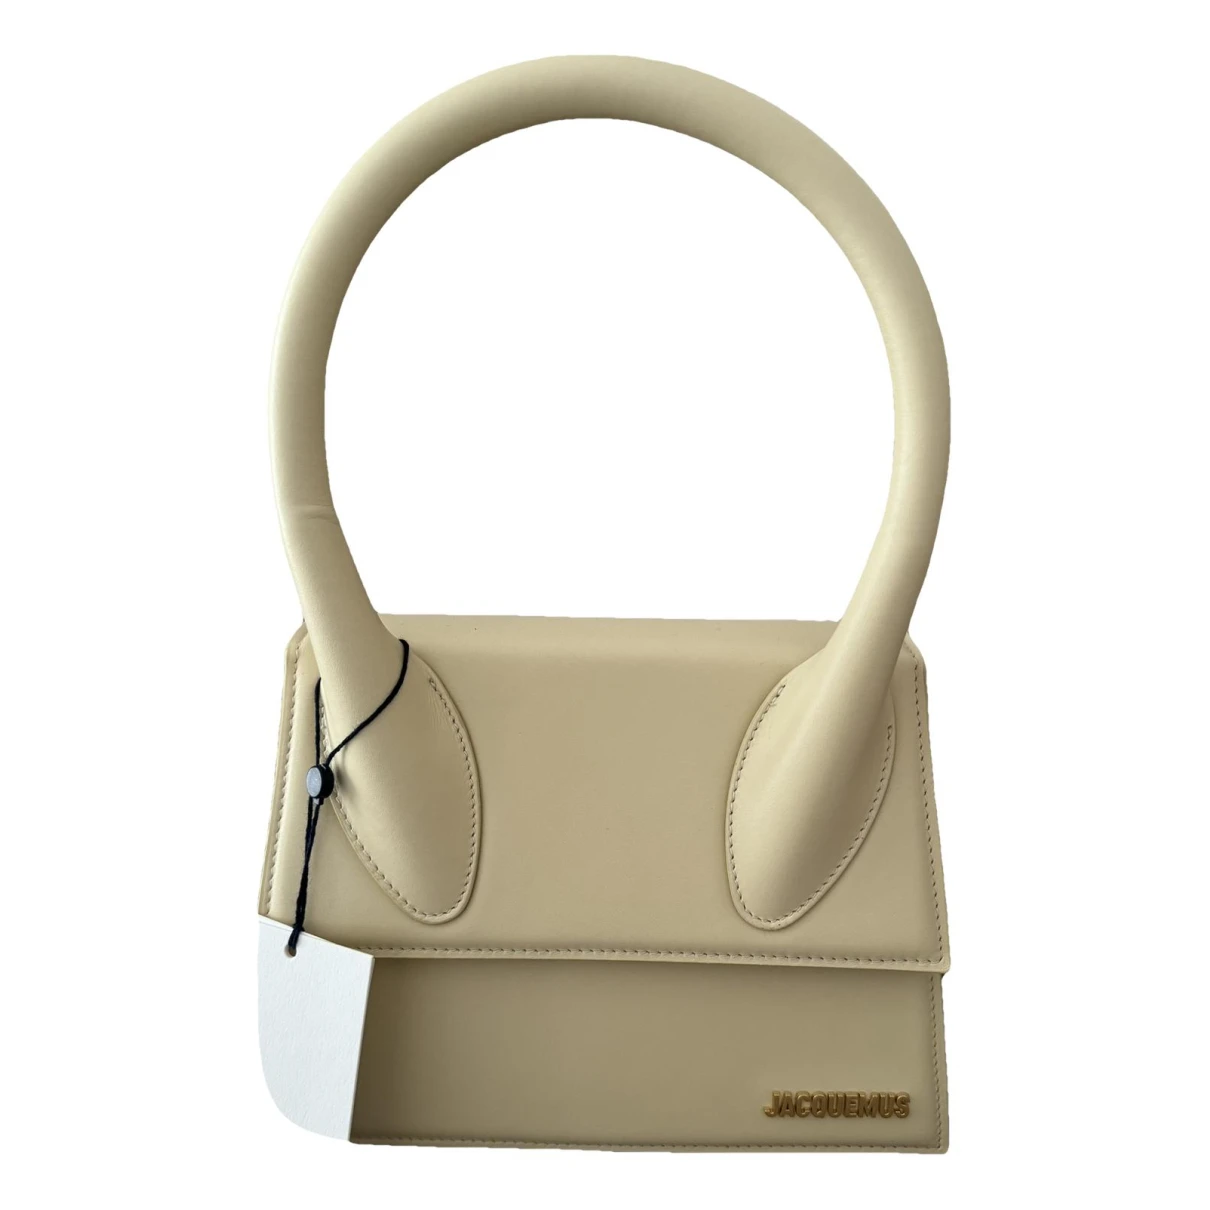 Pre-owned Jacquemus Chiquito Leather Handbag In Beige